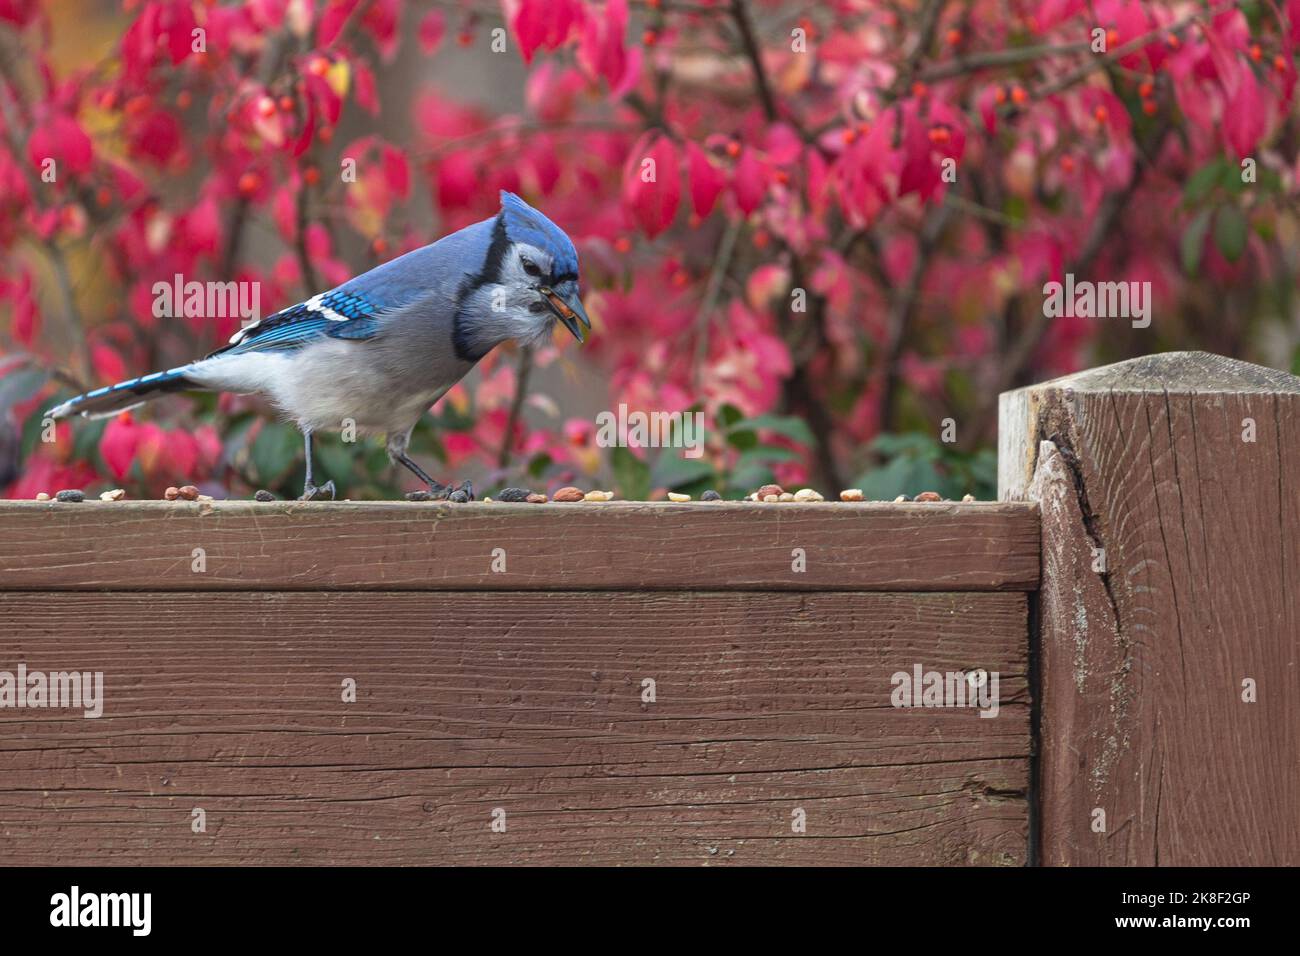 Side portrait of bluejay eating peanuts on a wooden railing against a red background of fall foliage. Stock Photo